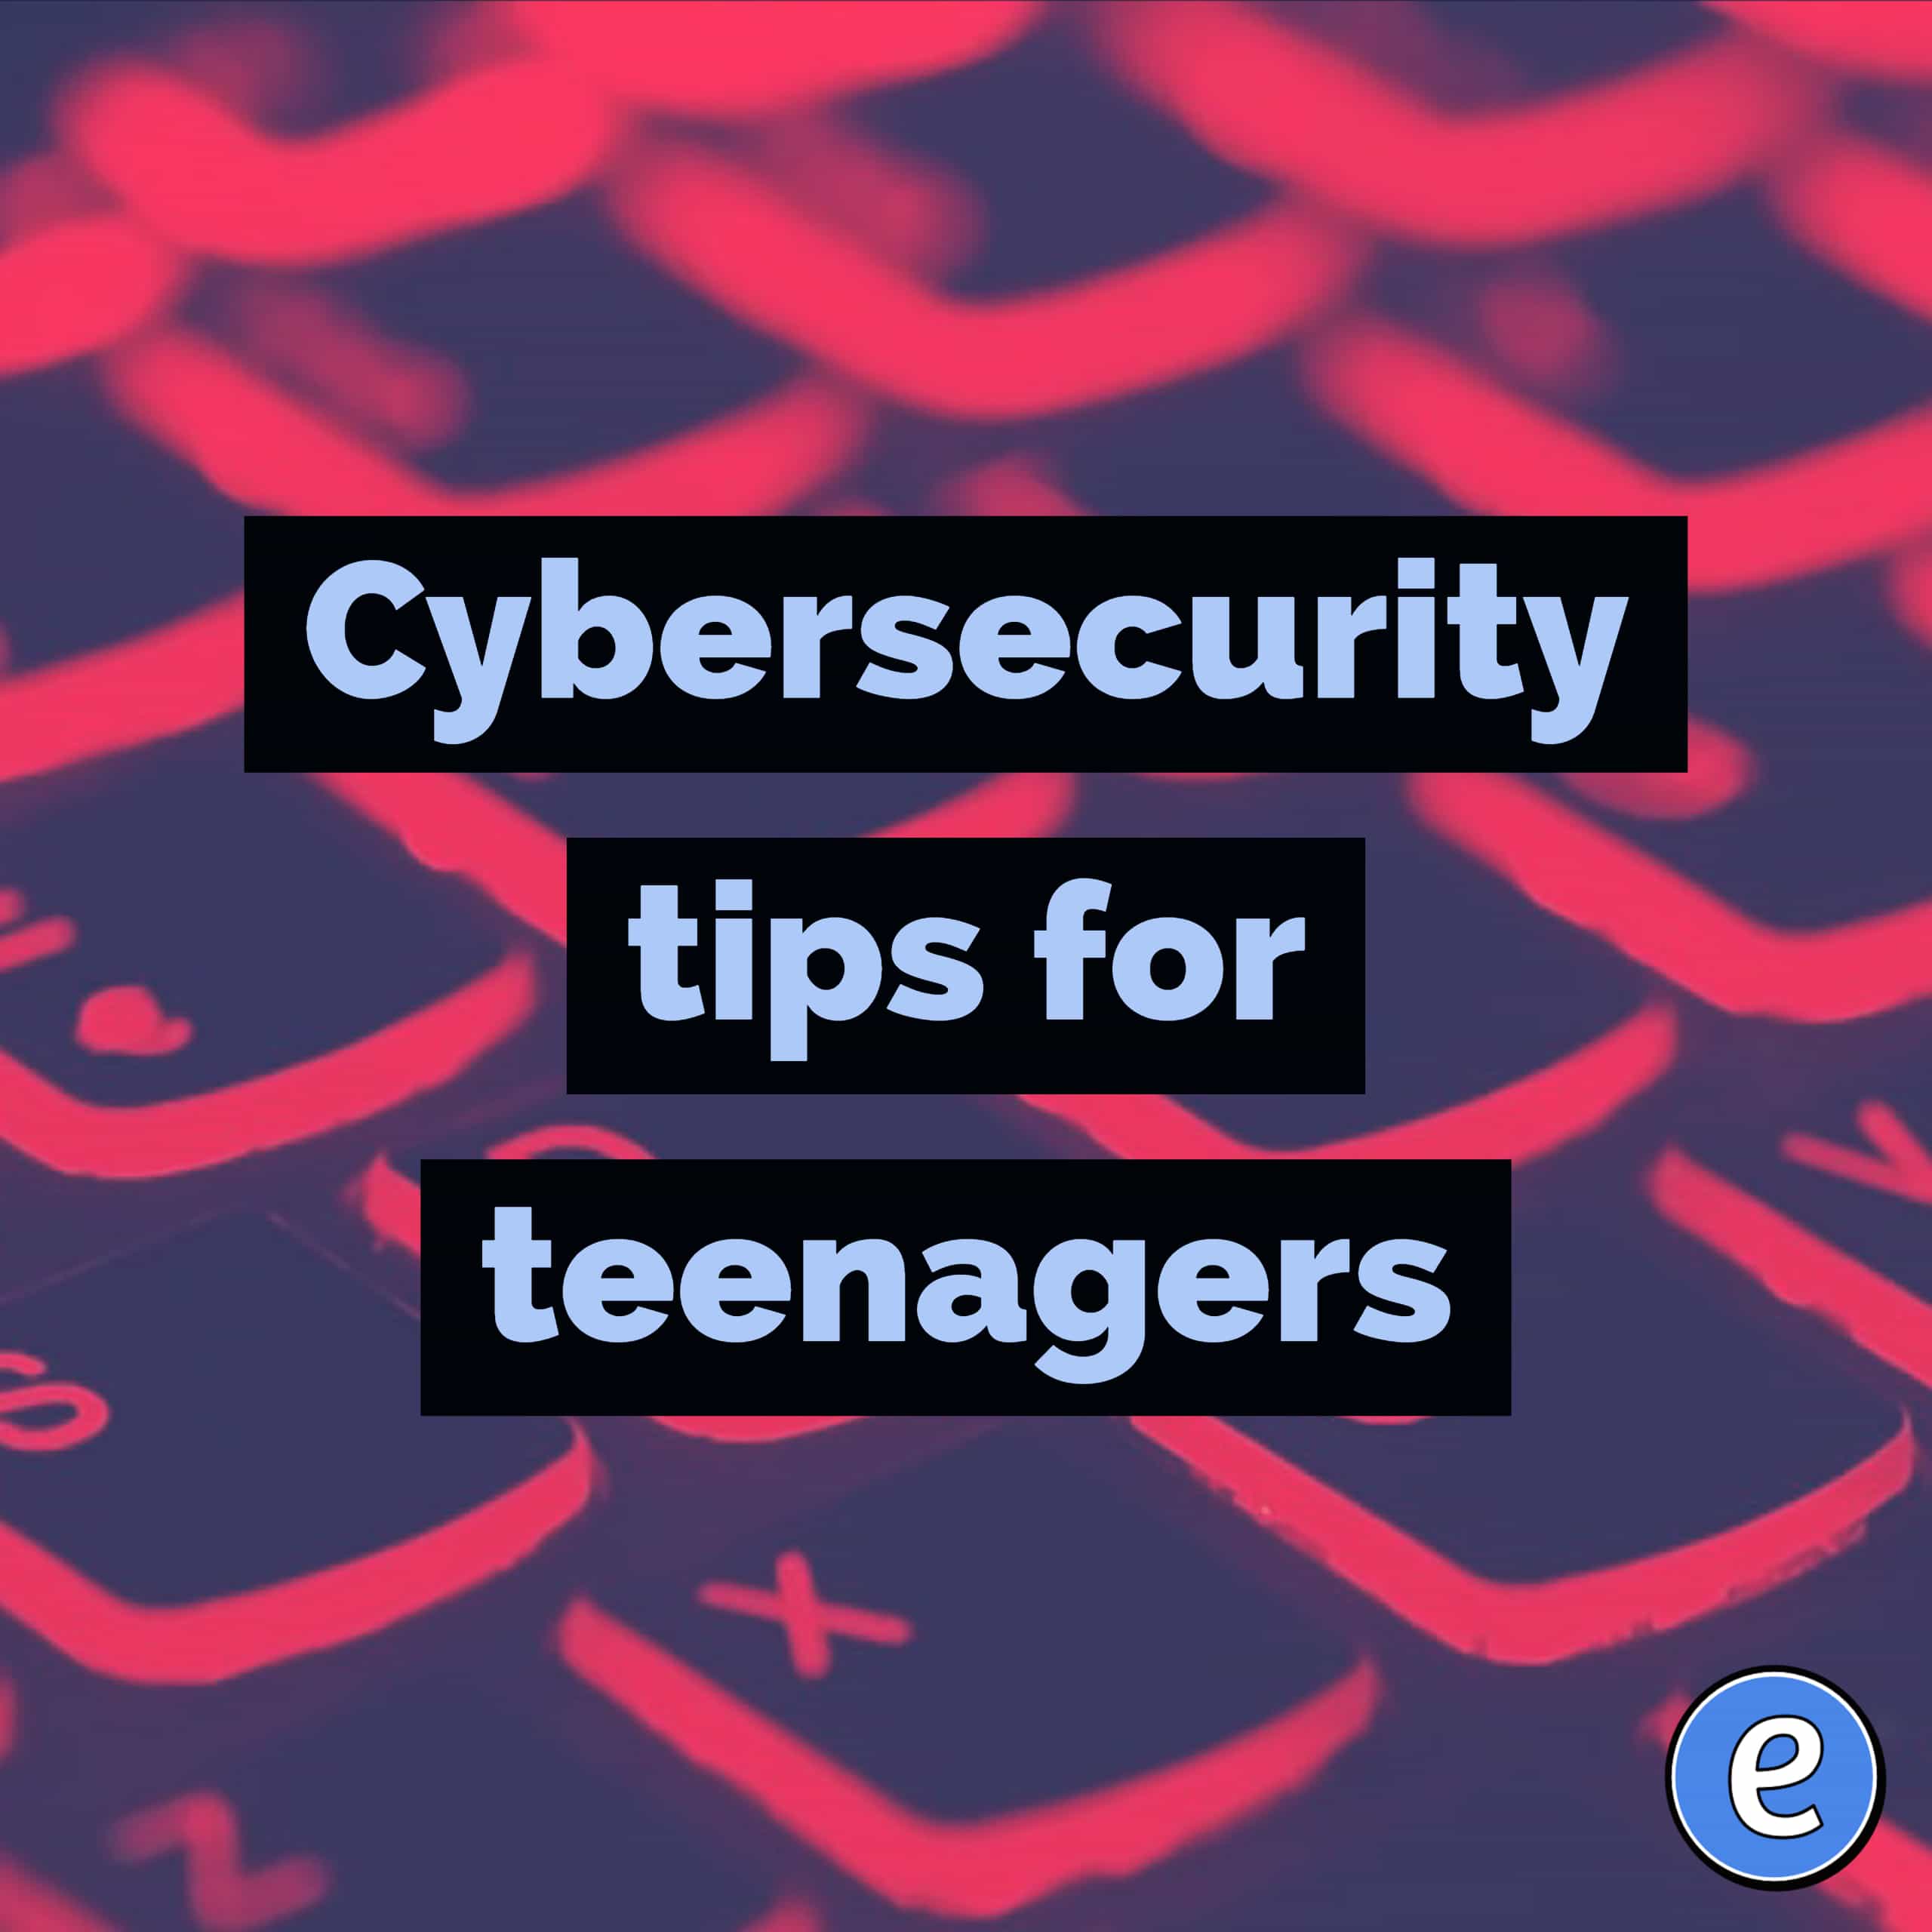 Cybersecurity tips for teenagers